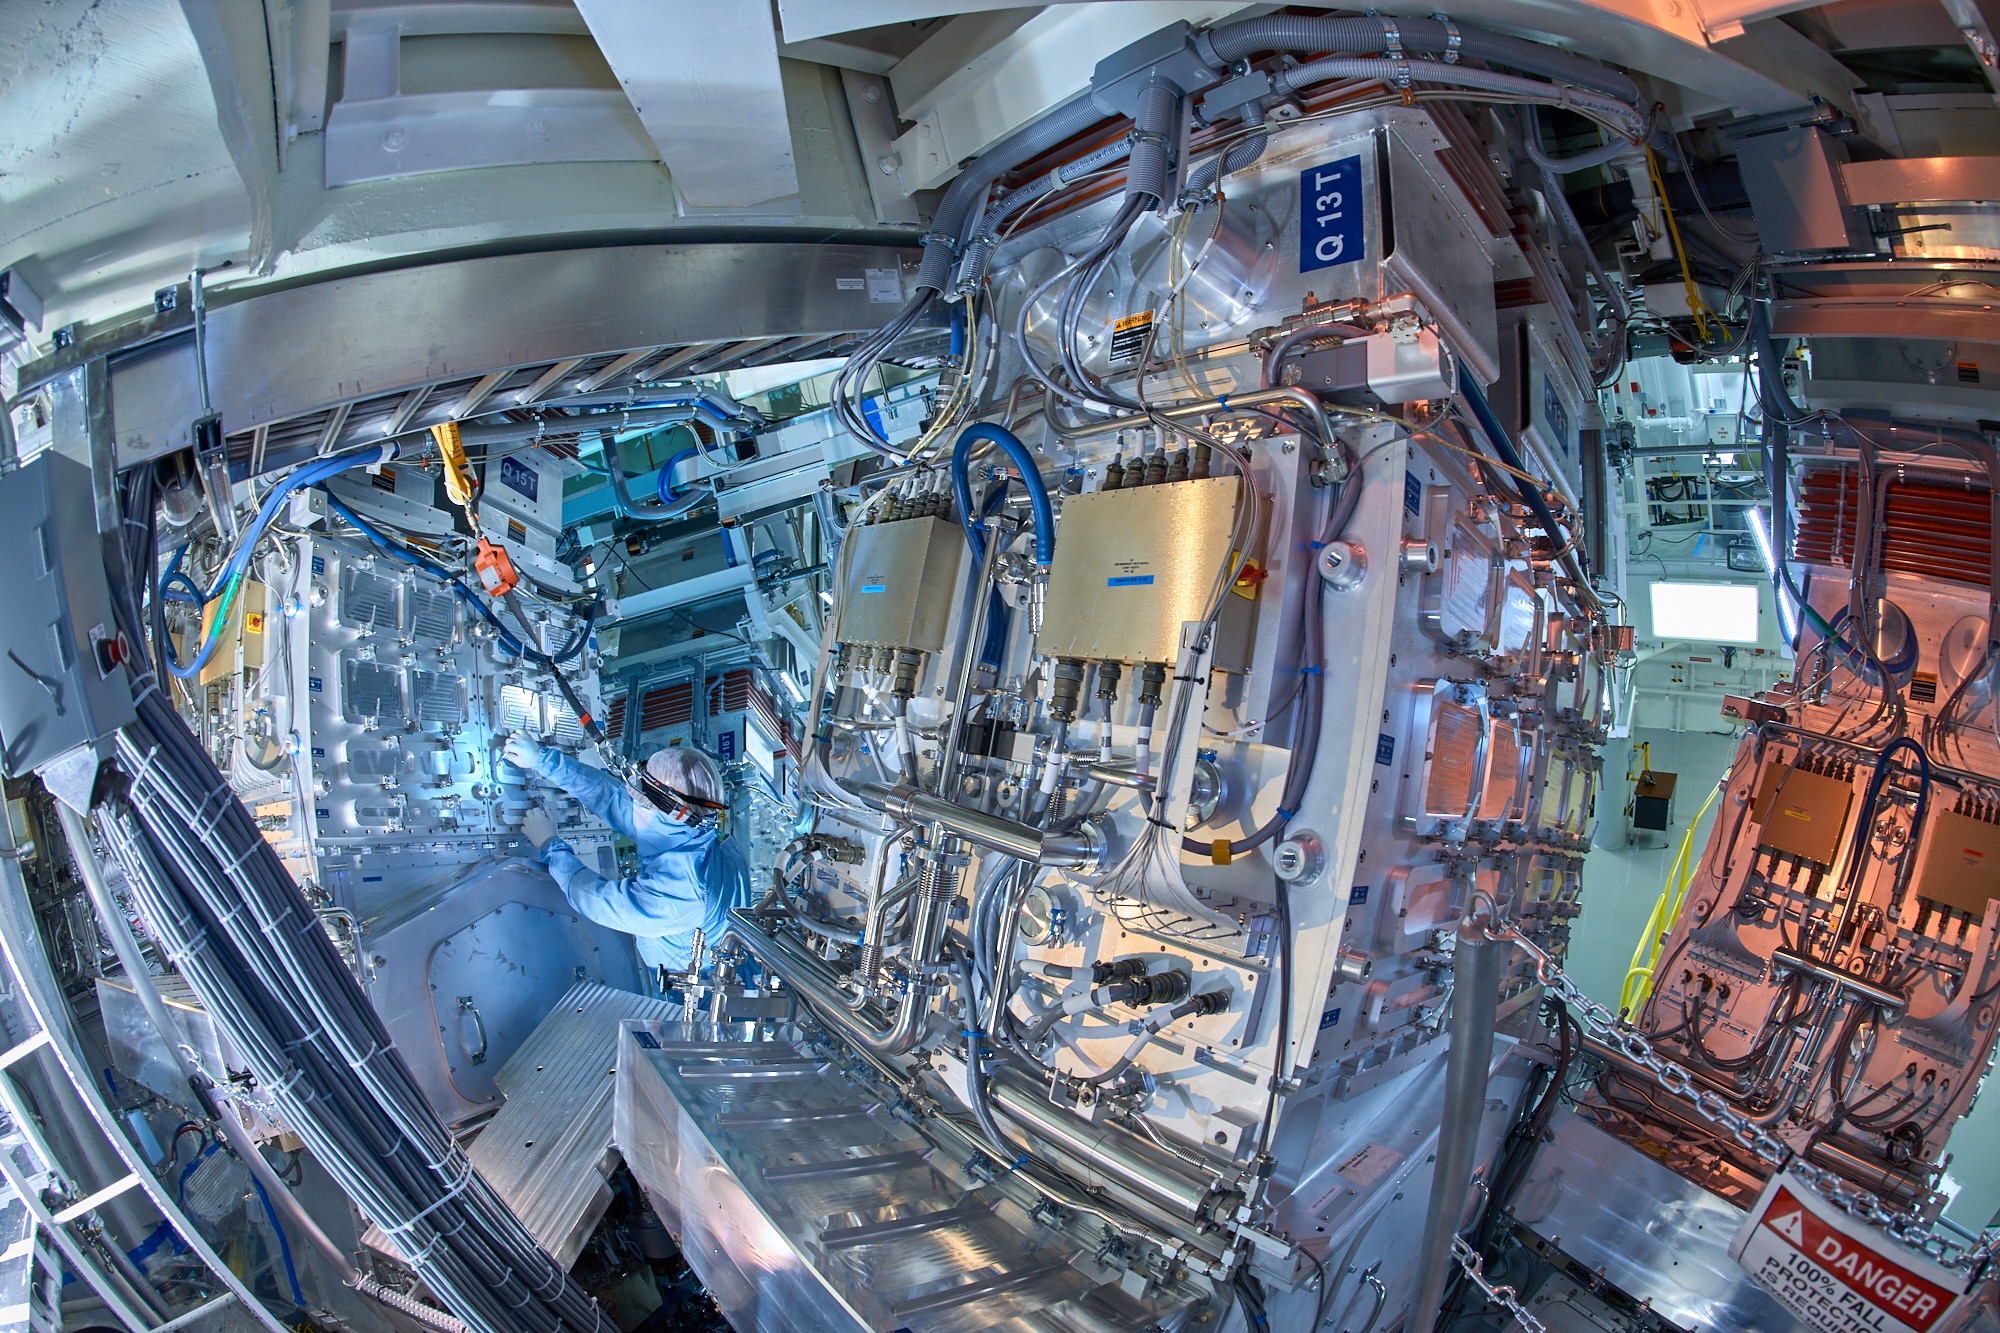 Photograph taken on top of the "Target Chamber" at NIF. A giant sphere in which the desired nuclear fusion reaction will occur.  192 lasers are directed from the laser bays into the center of sphere at a target that is the size of a BB.
Technician, Robert Cook, is pictured.